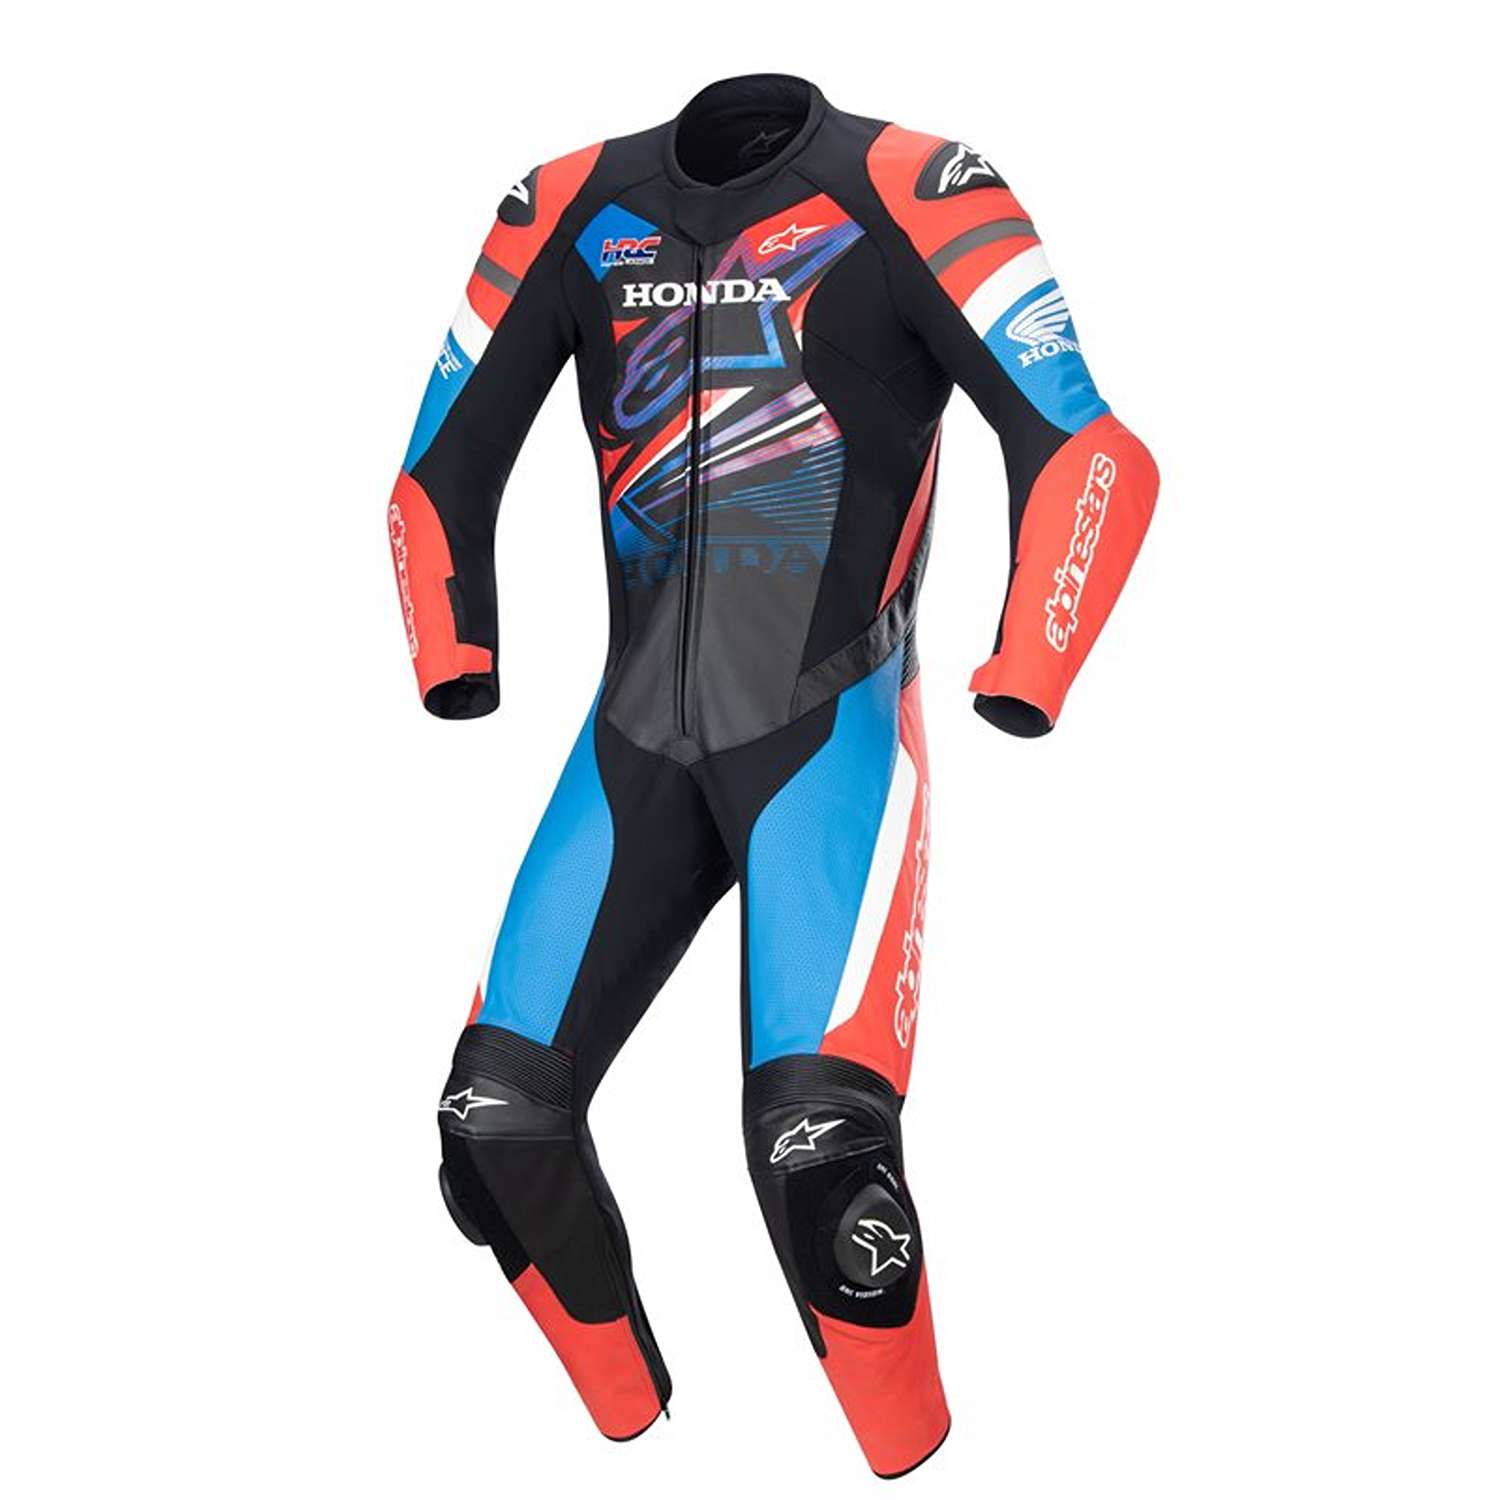 Image of Alpinestars Honda Gp Force Leather Suit Black Bright Red Blue Size 48 ID 8059347160283